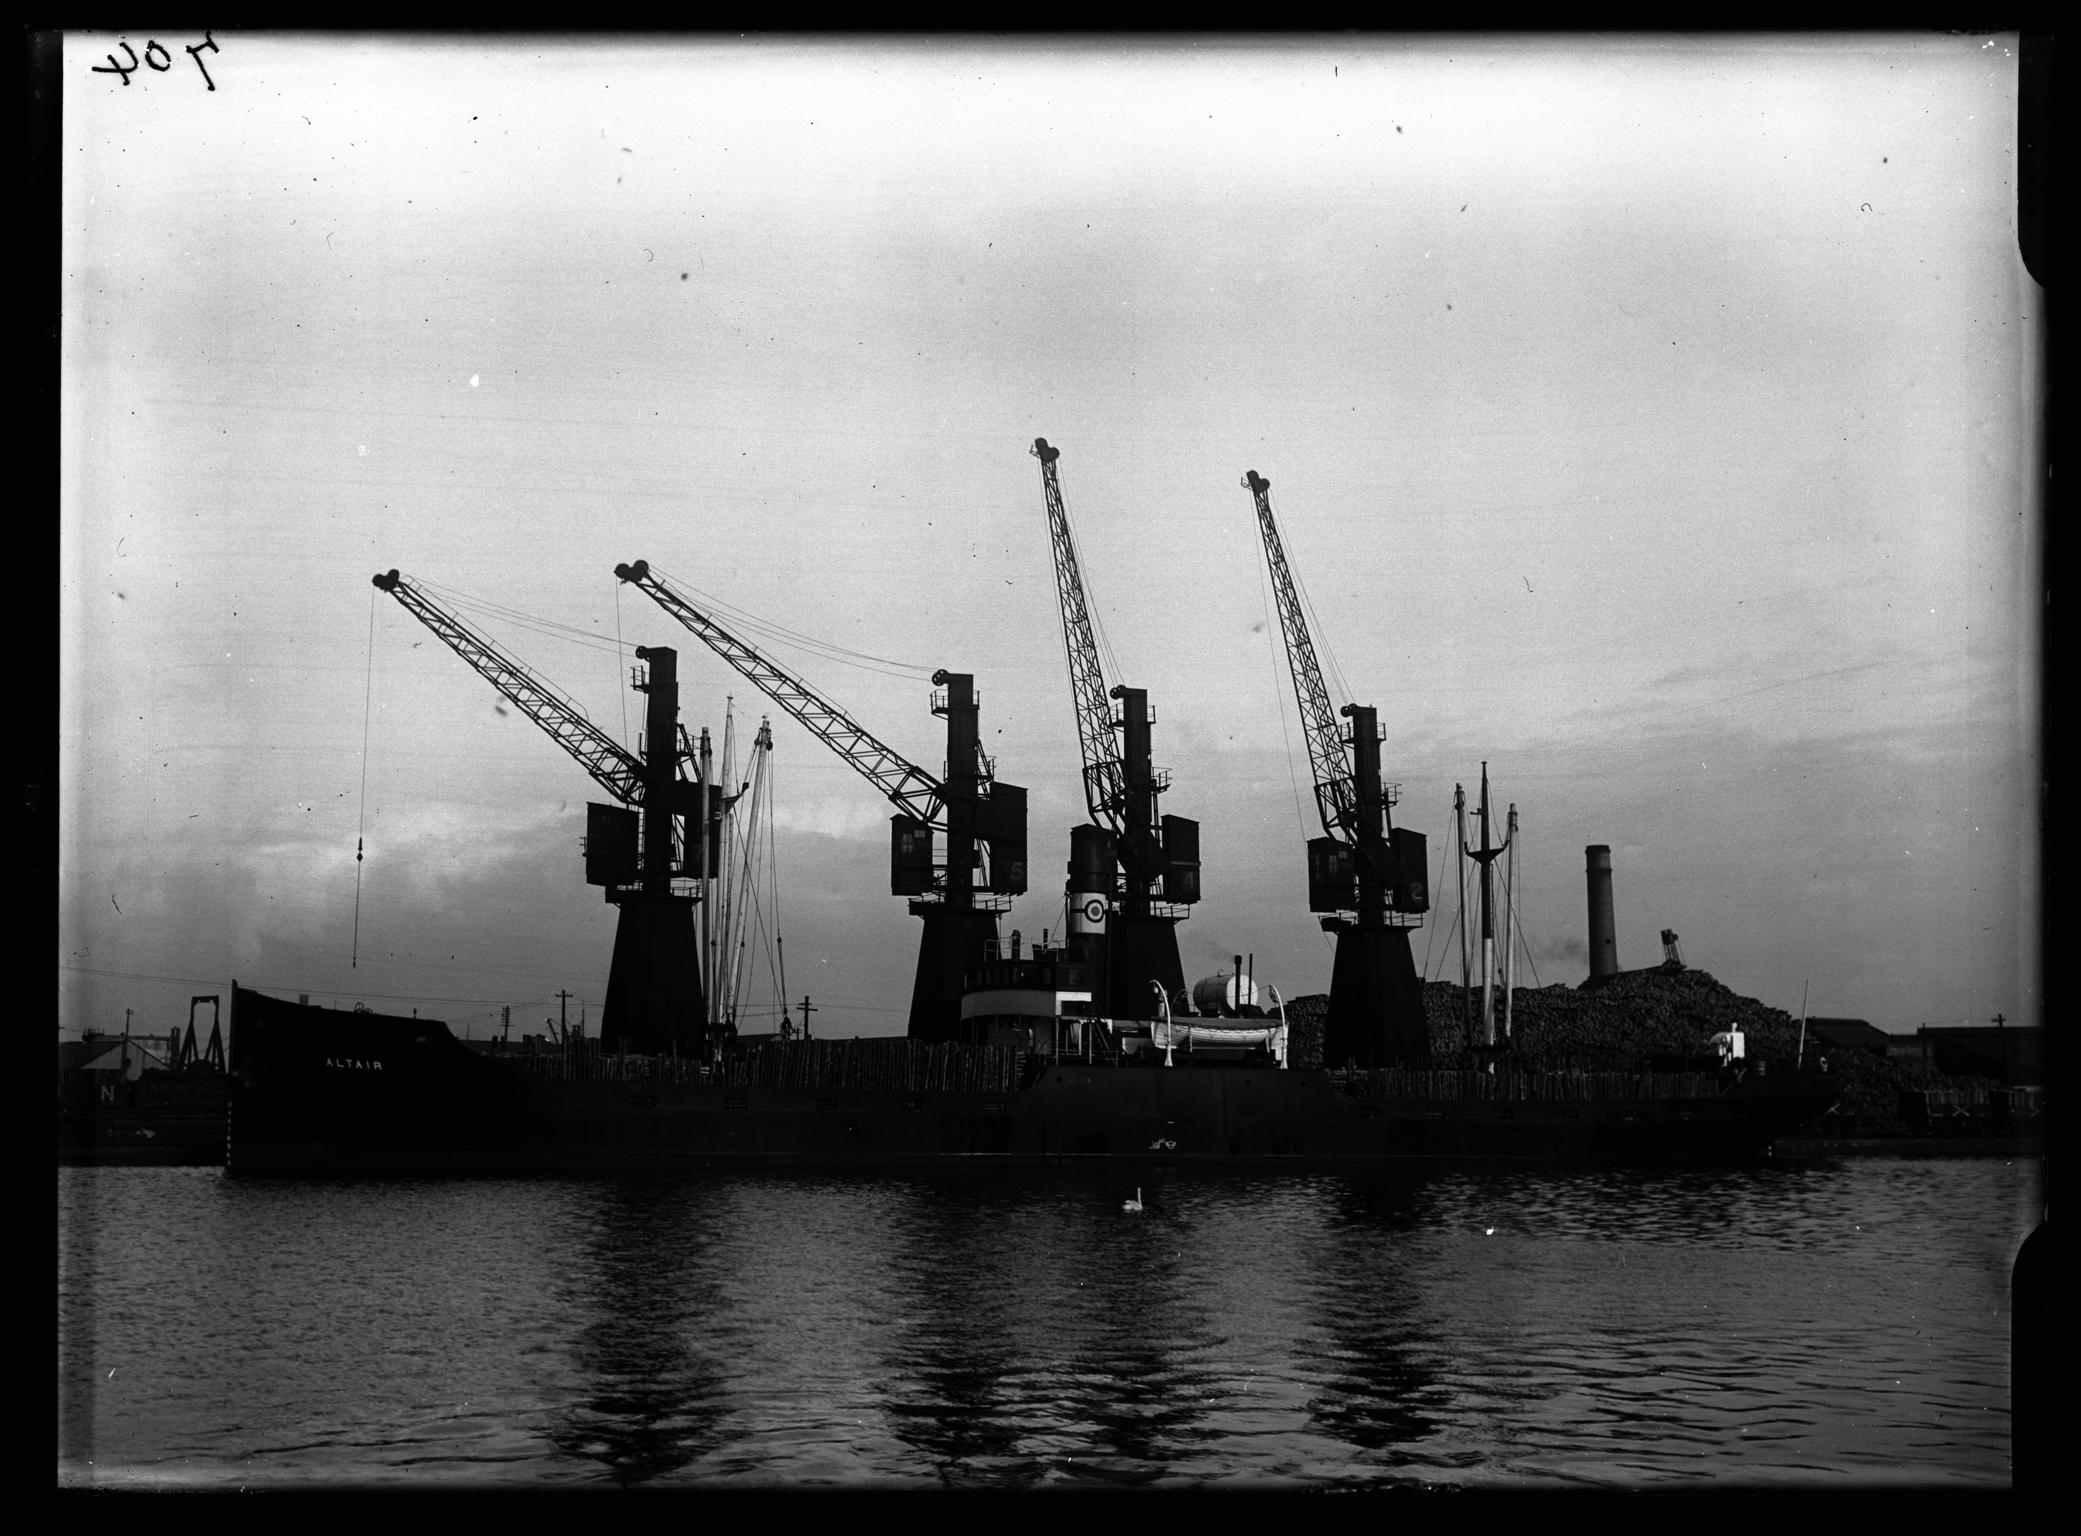 S.S. ALTAIR, glass negative